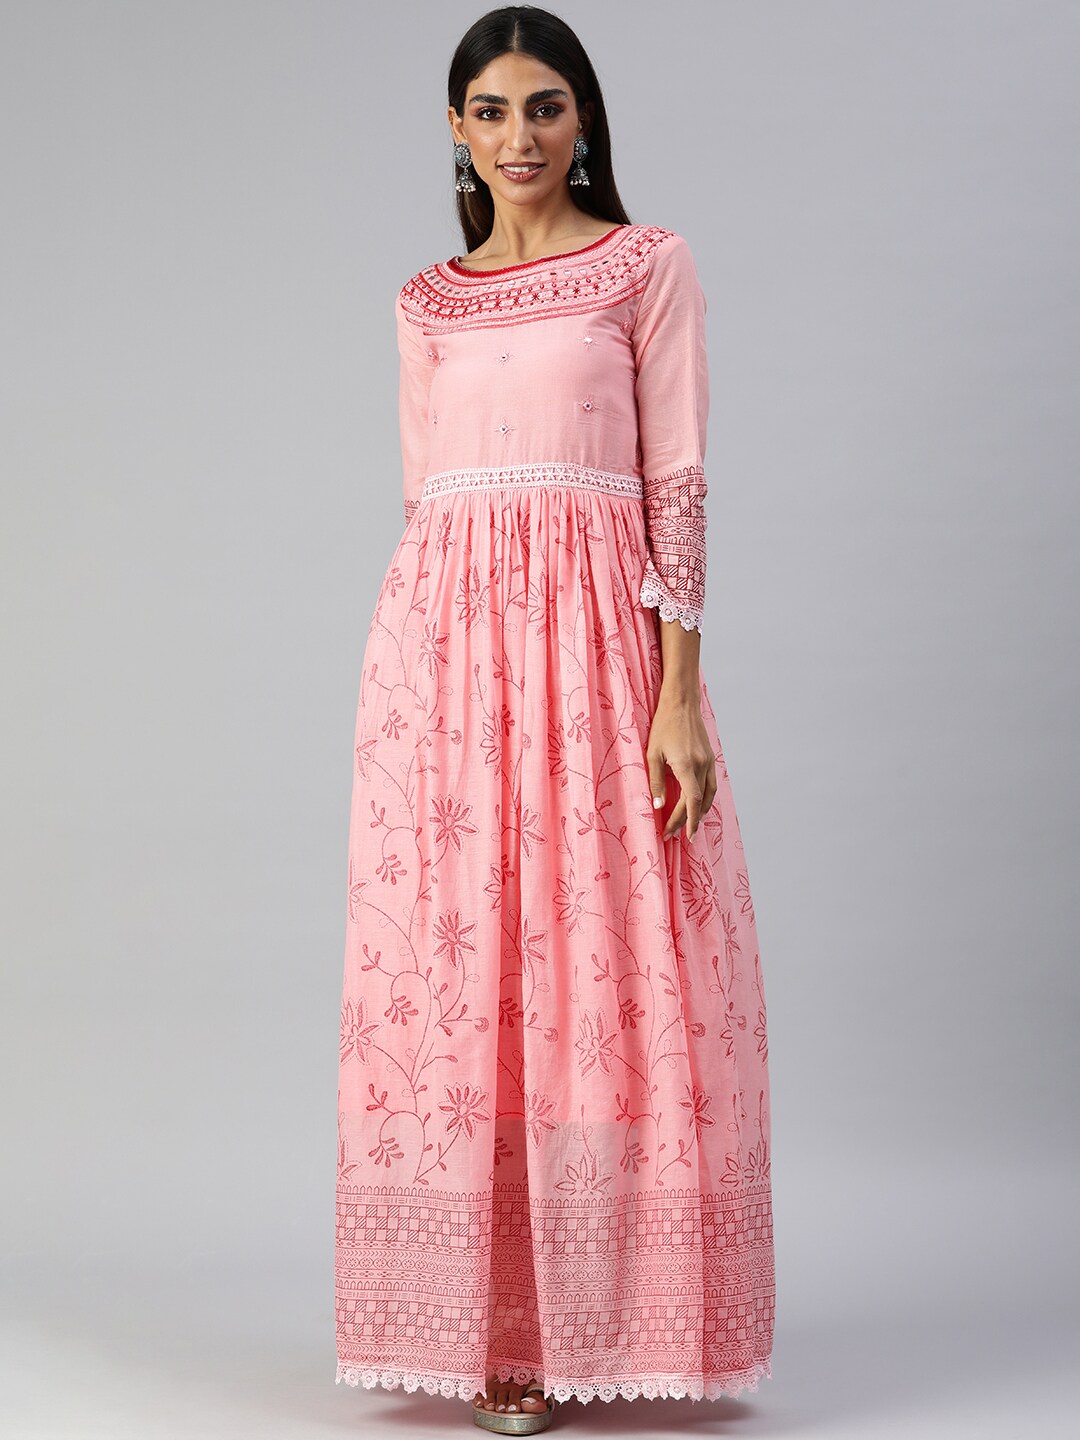 SheWill Pink Floral Print Mirror Work Embroidered Ethnic A-Line Maxi Dress Price in India